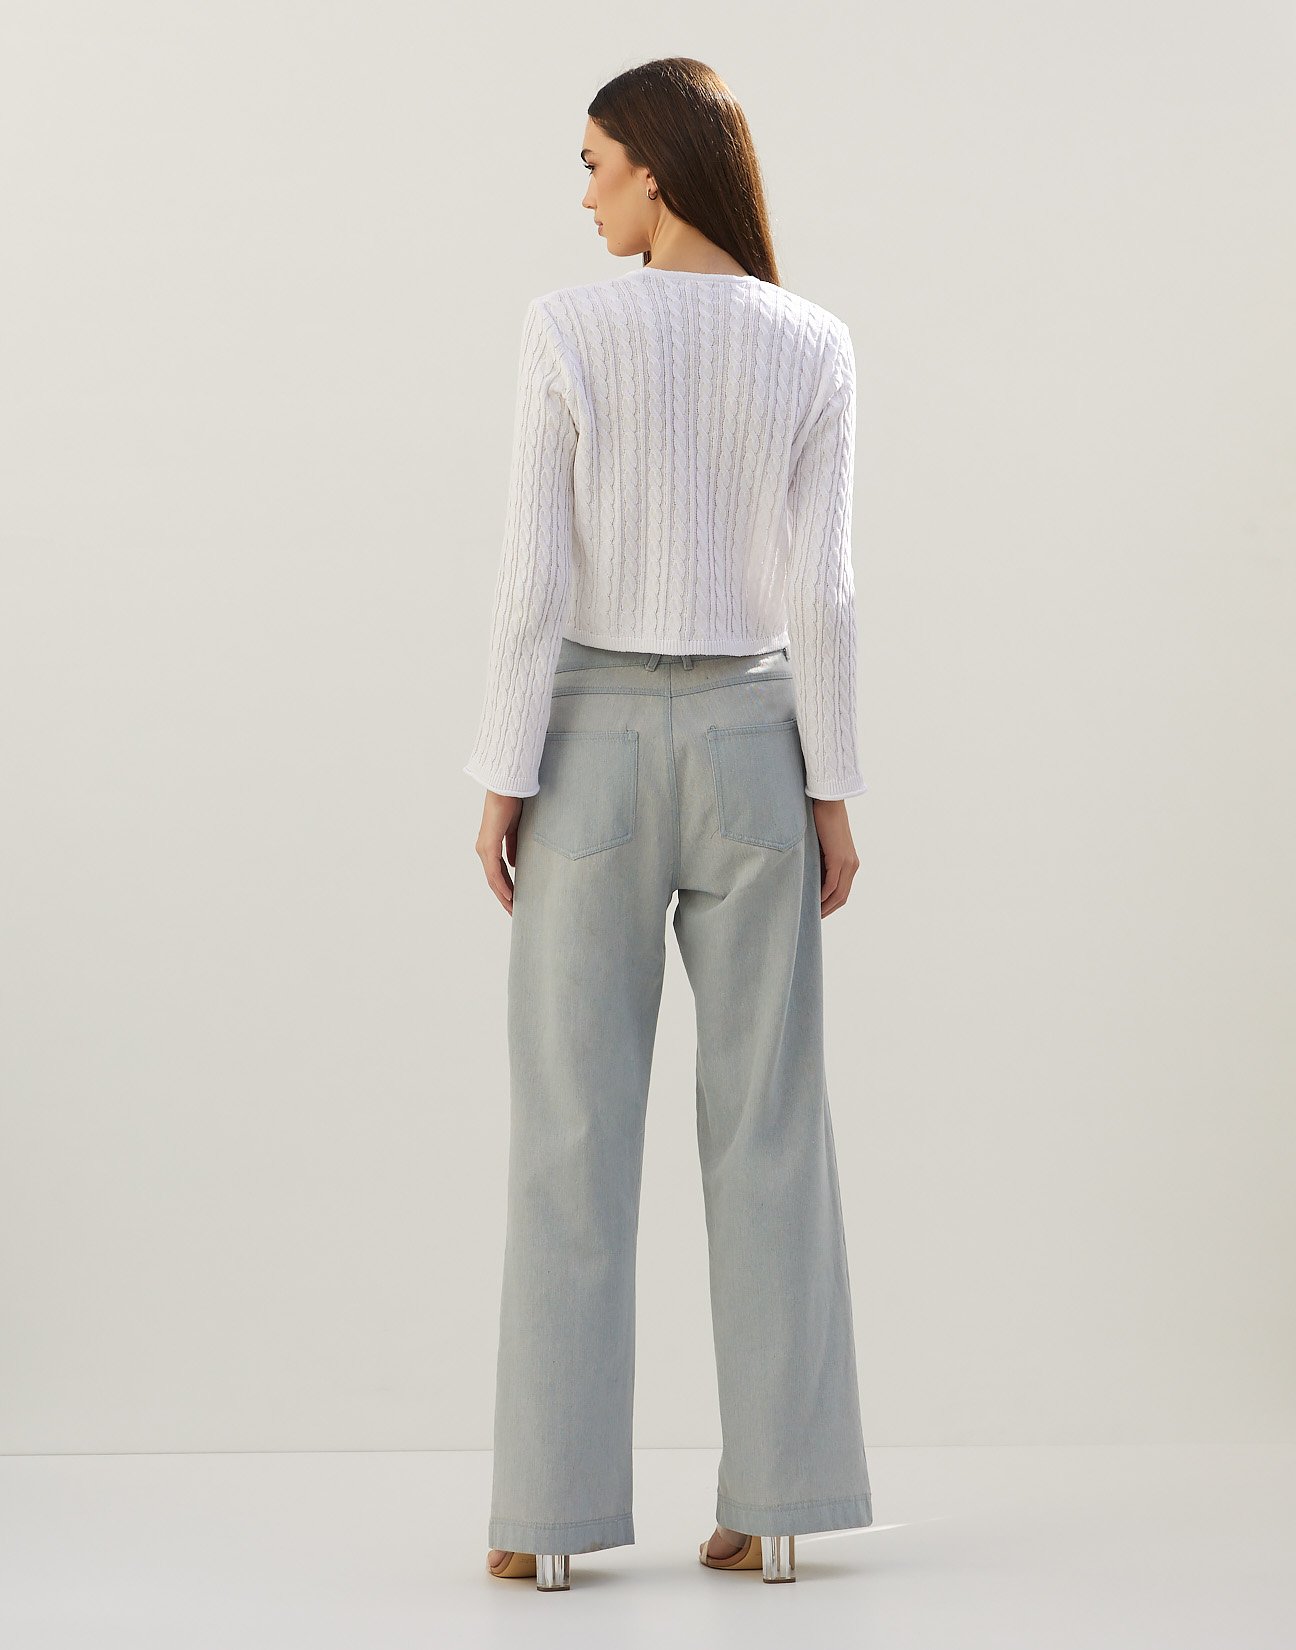 Pleated jeans